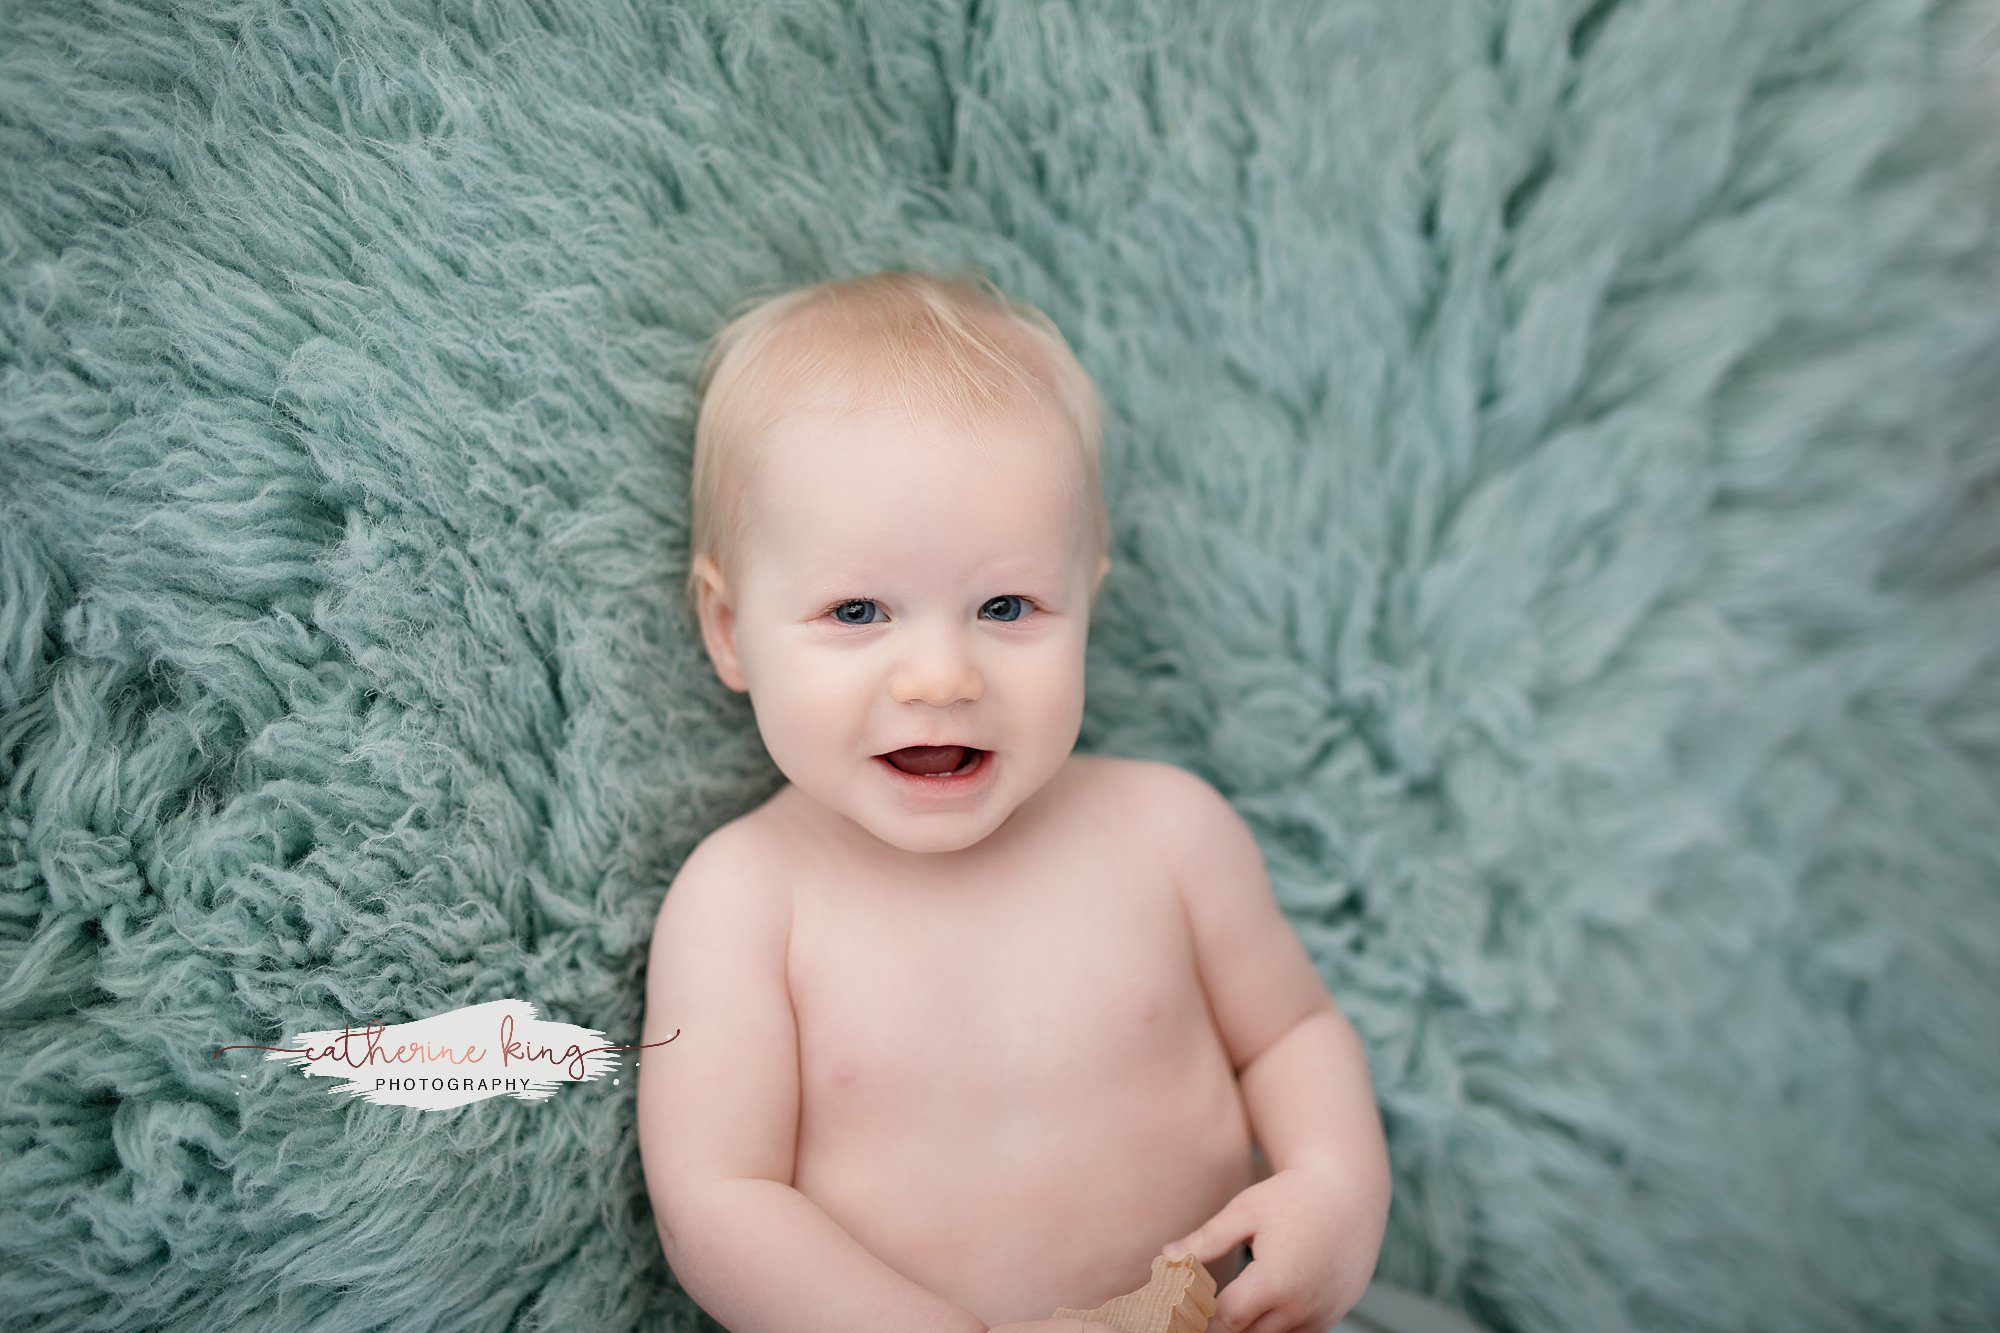 Ethan's 9 month milestone photography, Painville CT